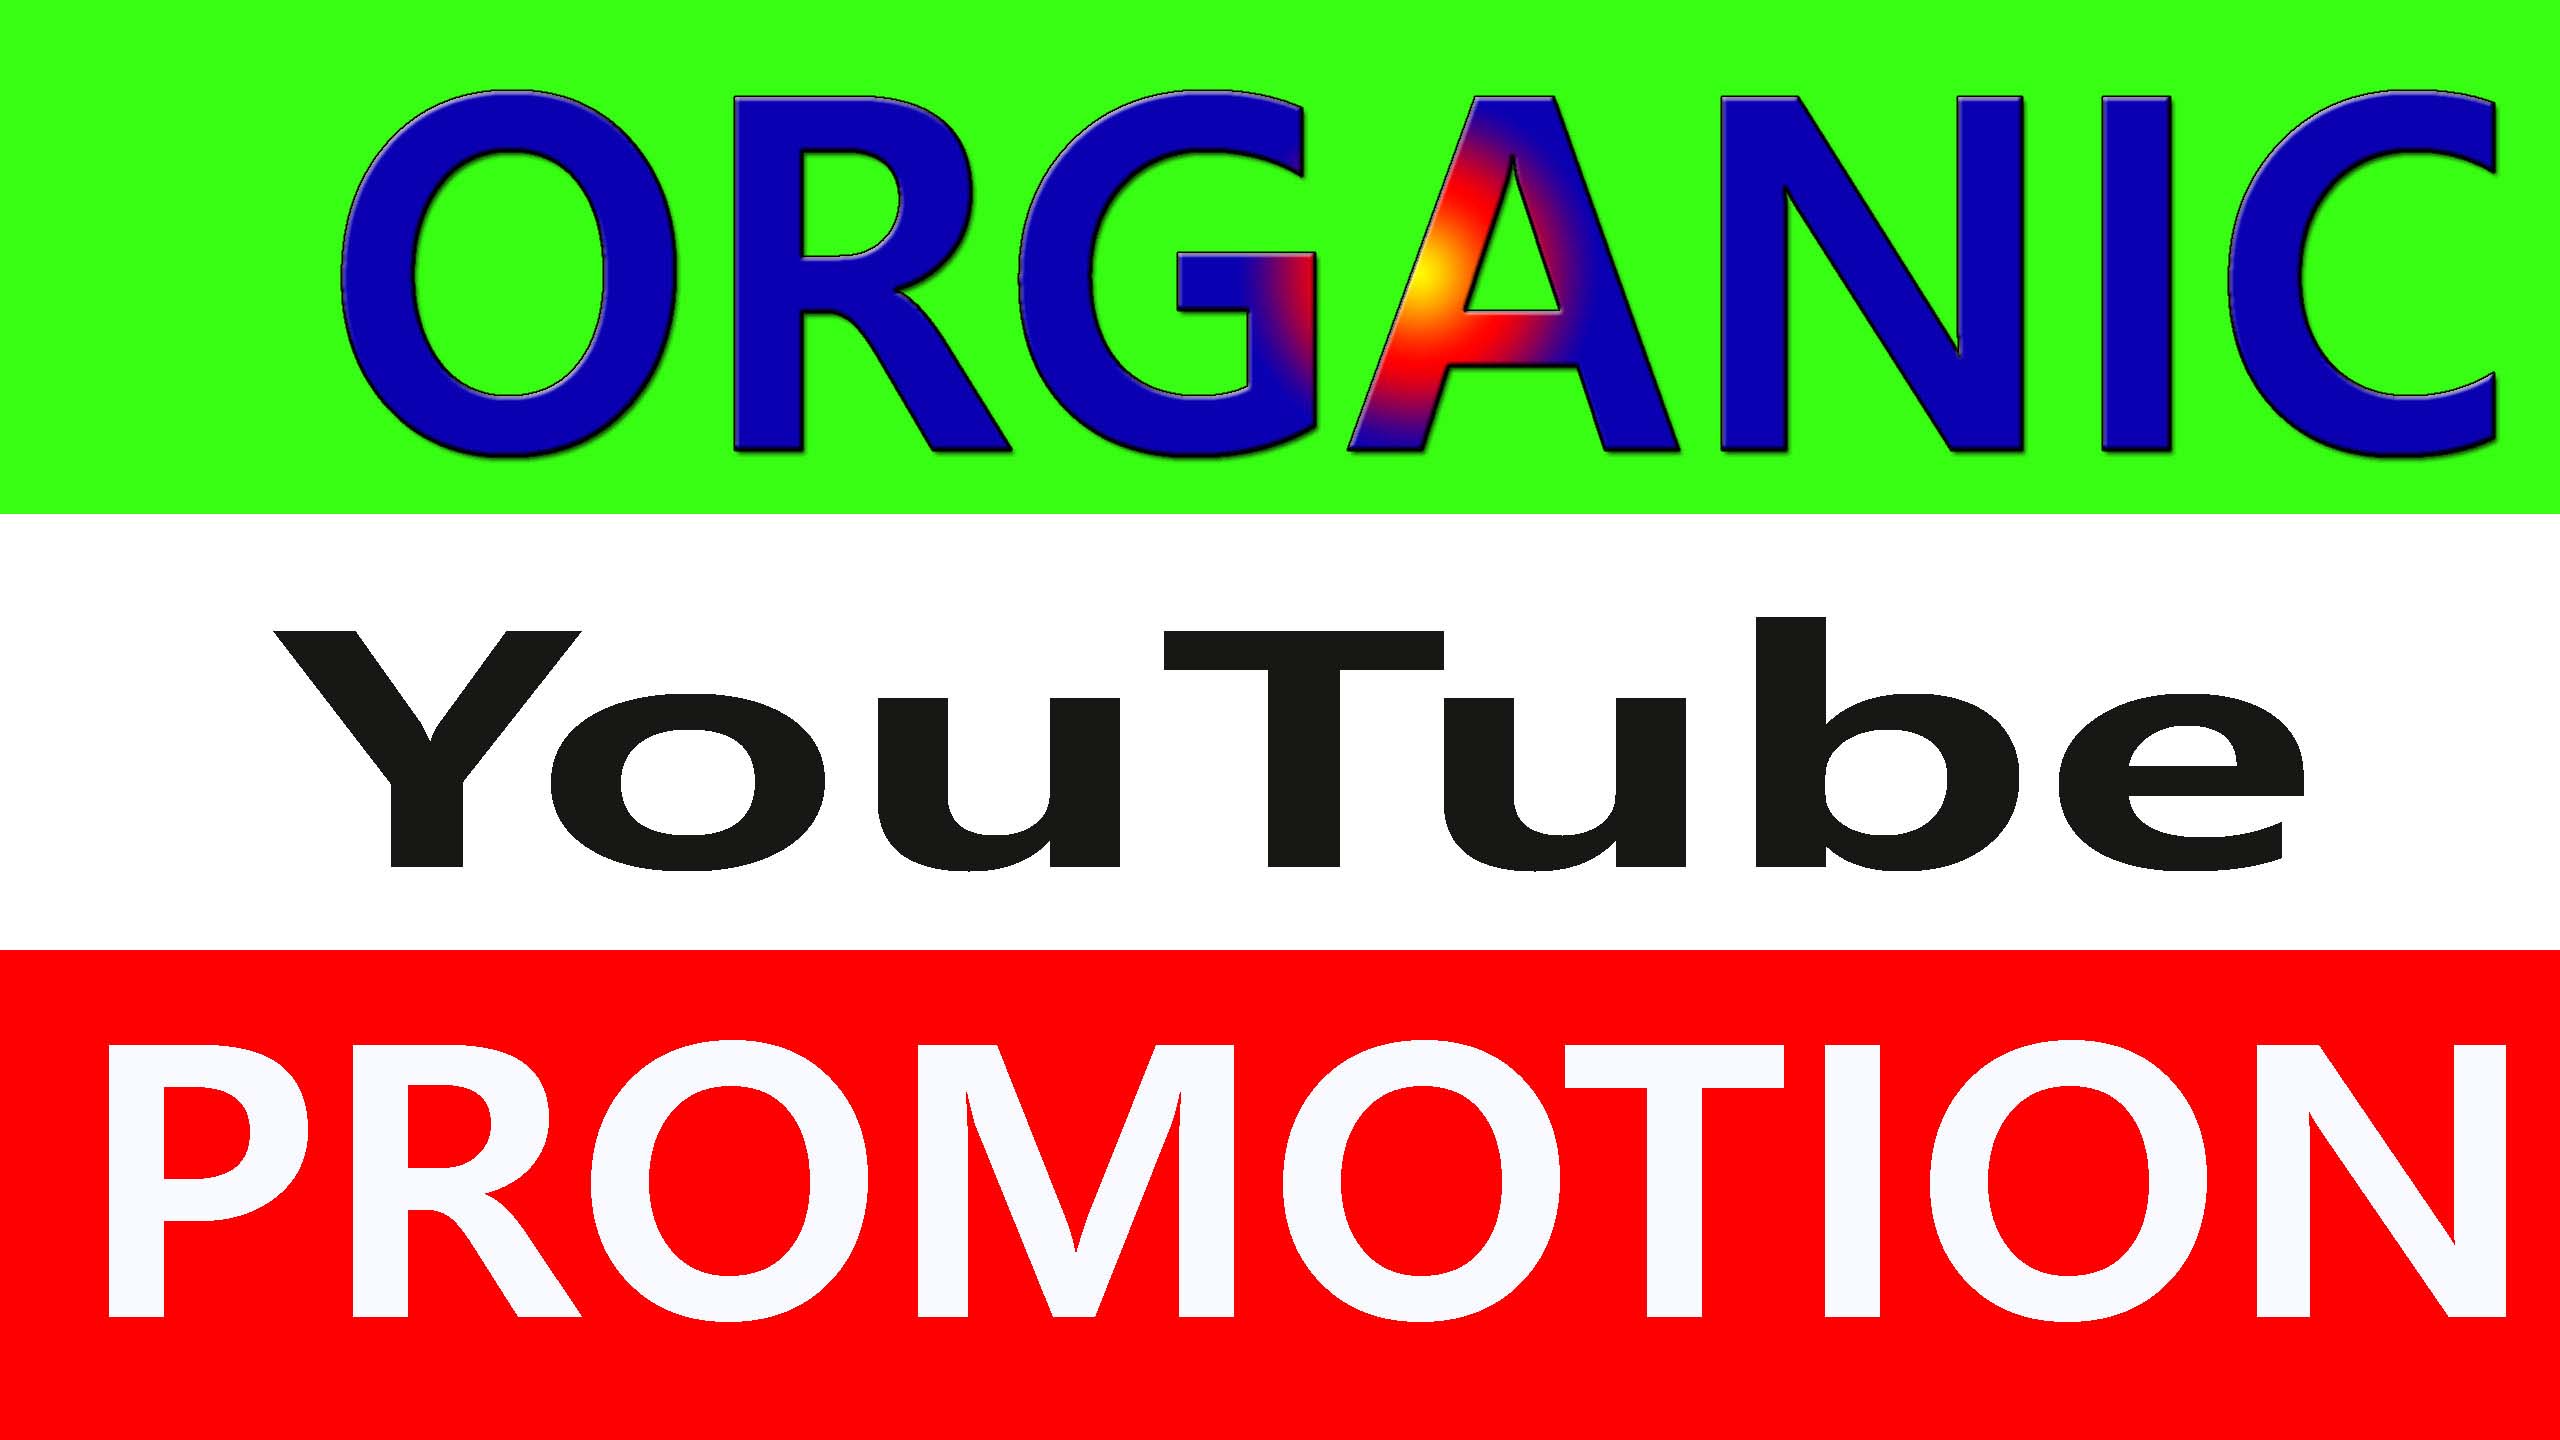 we will Do Fast You Tube video and chanel Promotion by social media marketing